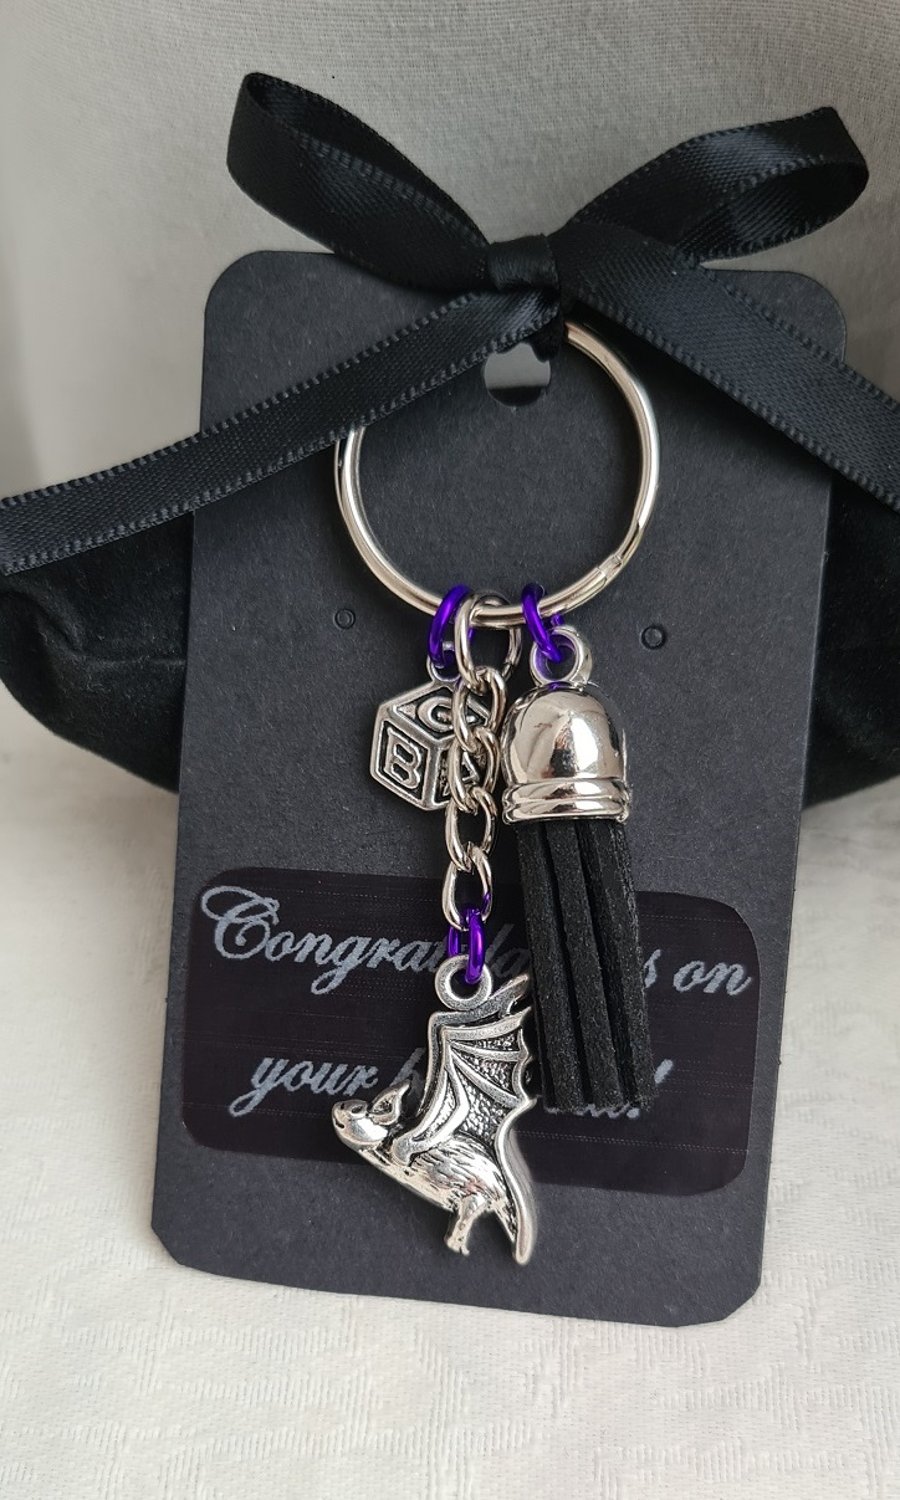 Gorgeous Gothic Baby Themed Key Ring - Black - Key Chain - Silver tones